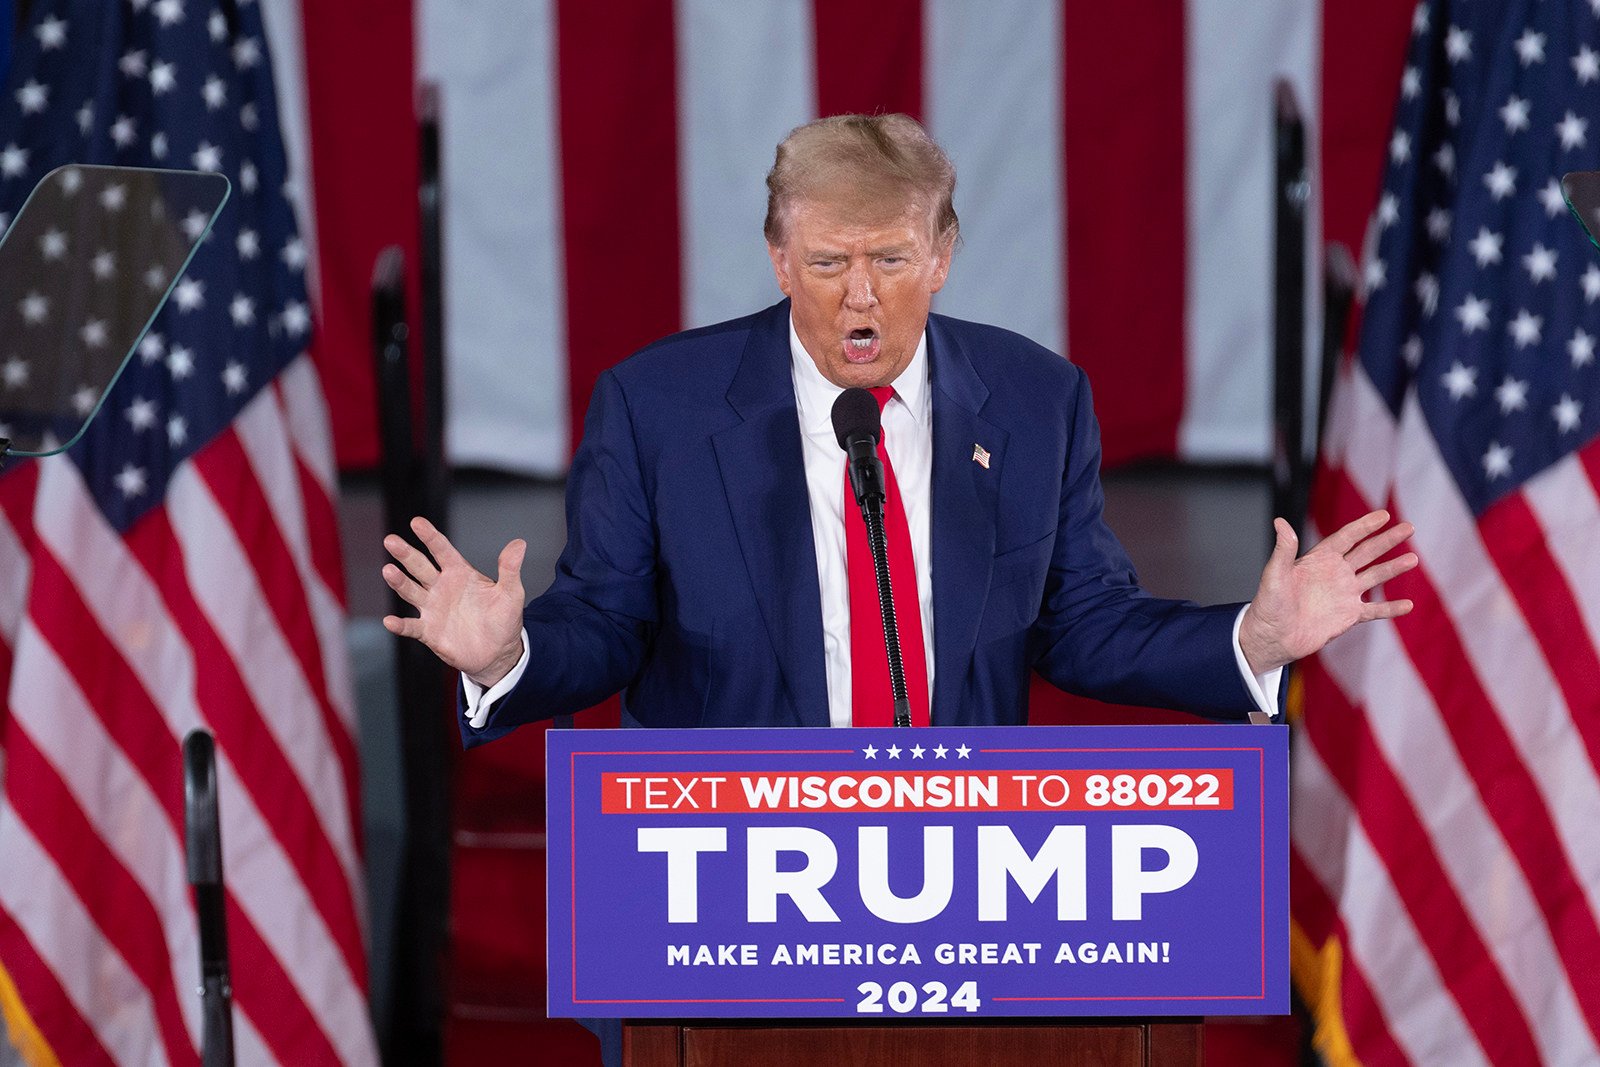 Former US president Donald Trump speaks at a campaign rally on May 1 in Wisconsin. A recent poll has Trump and President Joe Biden tied in the state. Photo: Getty Images/TNS